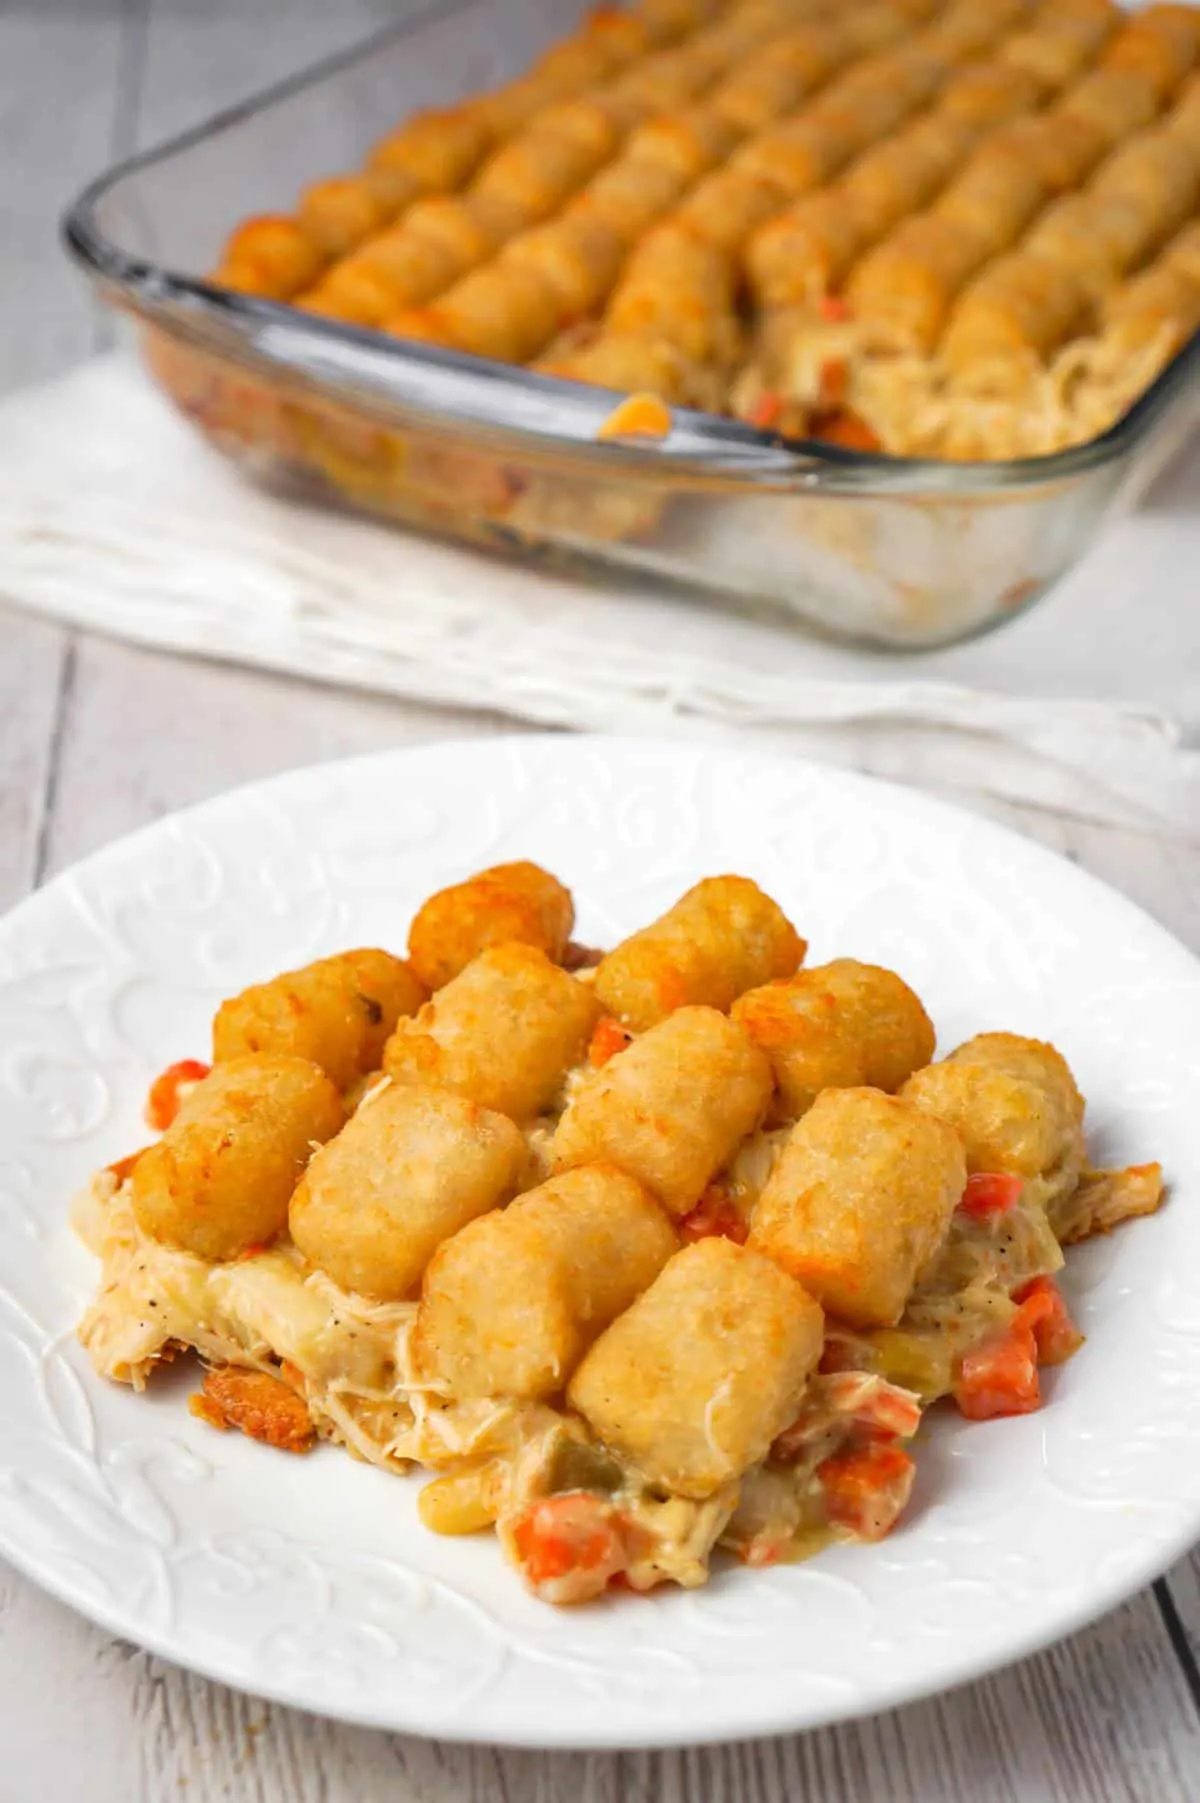 Chicken Pot Pie Tater Tot Casserole is an easy dinner recipe using shredded rotisserie chicken tossed with cream of chicken soup and mixed veggies all topped with tater tots.